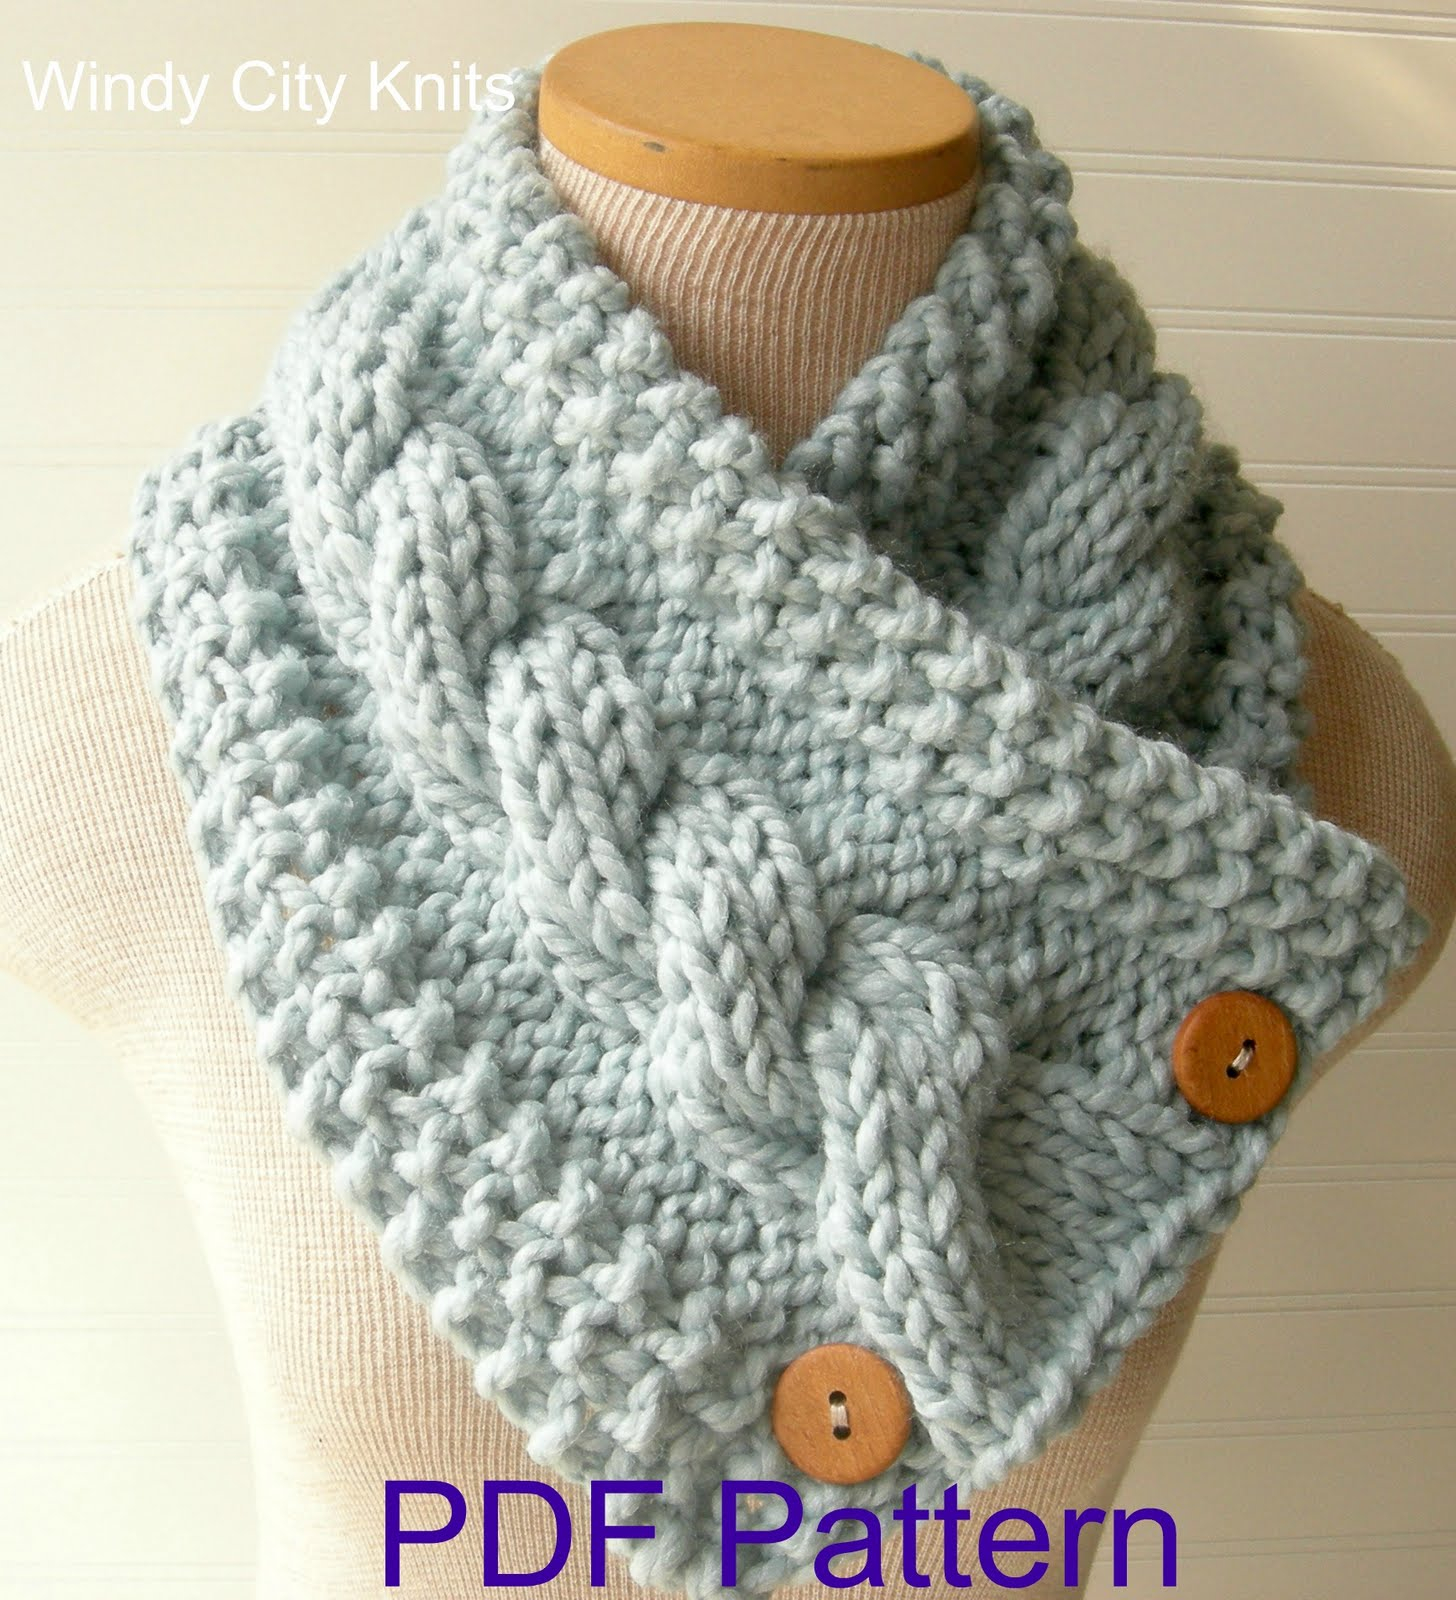 Cable Knit Scarf Pattern Free Windycityknits Knit Cable Cowl Scarf Pattern Pdf